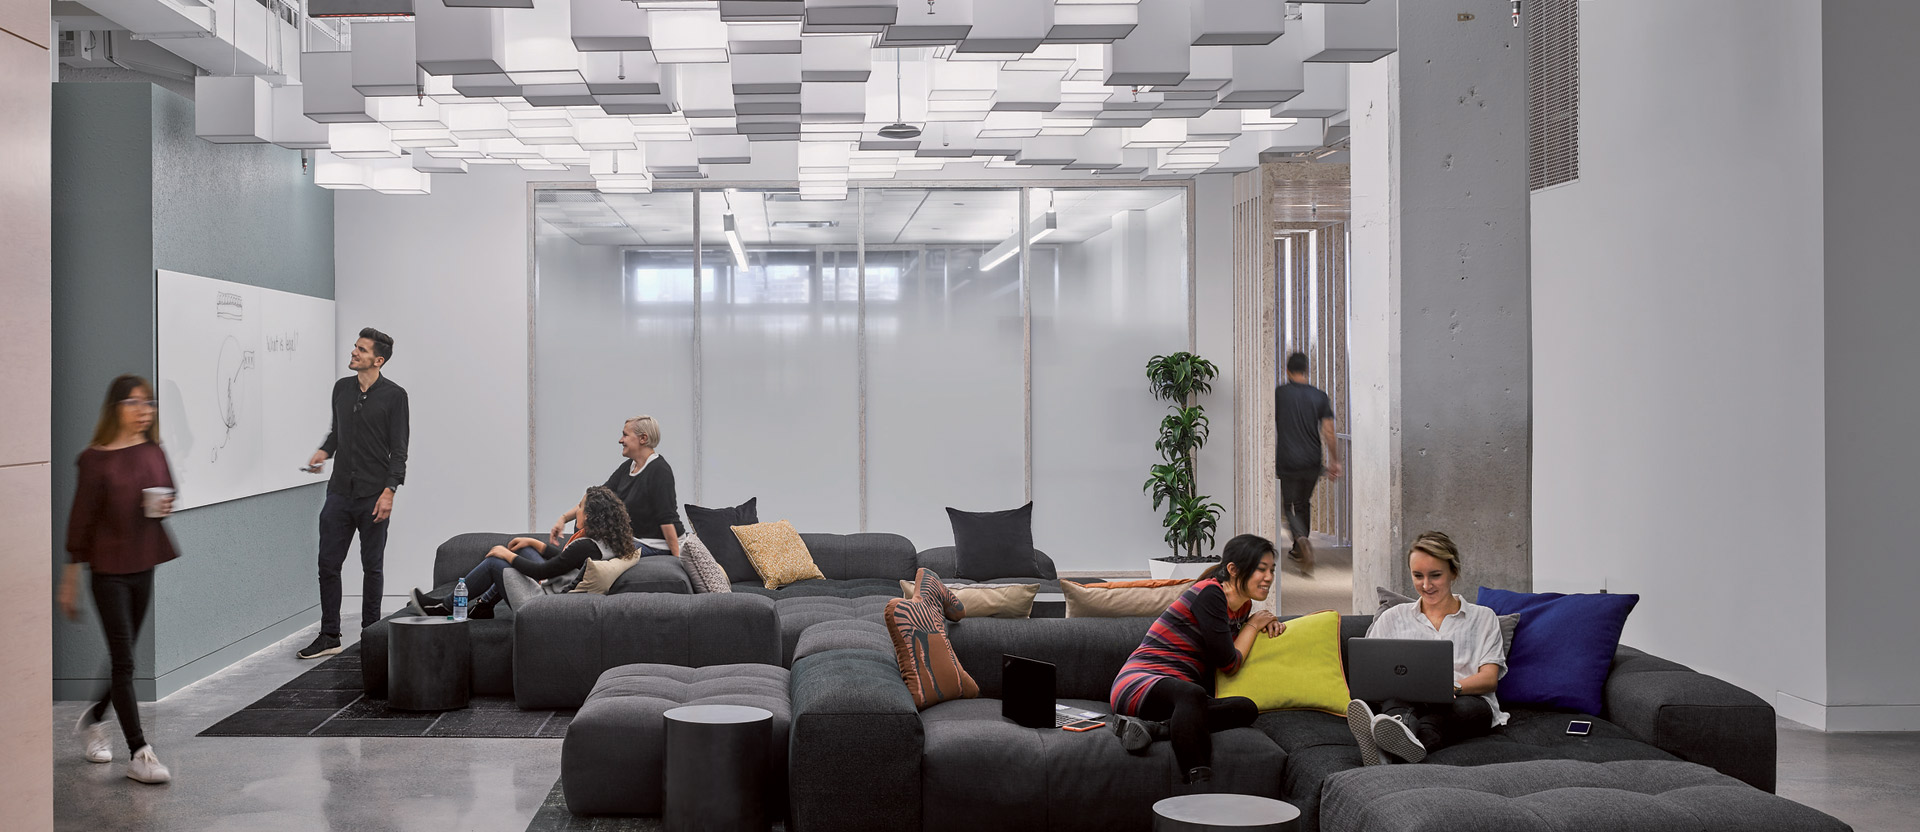 Modern office lounge with varied modular seating arrangements using plush, dark upholstered pieces. Overhead, a geometric pattern of rectangular light fixtures complements the exposed ceiling, creating a dynamic, sleek environment conducive to informal meetings or individual work.